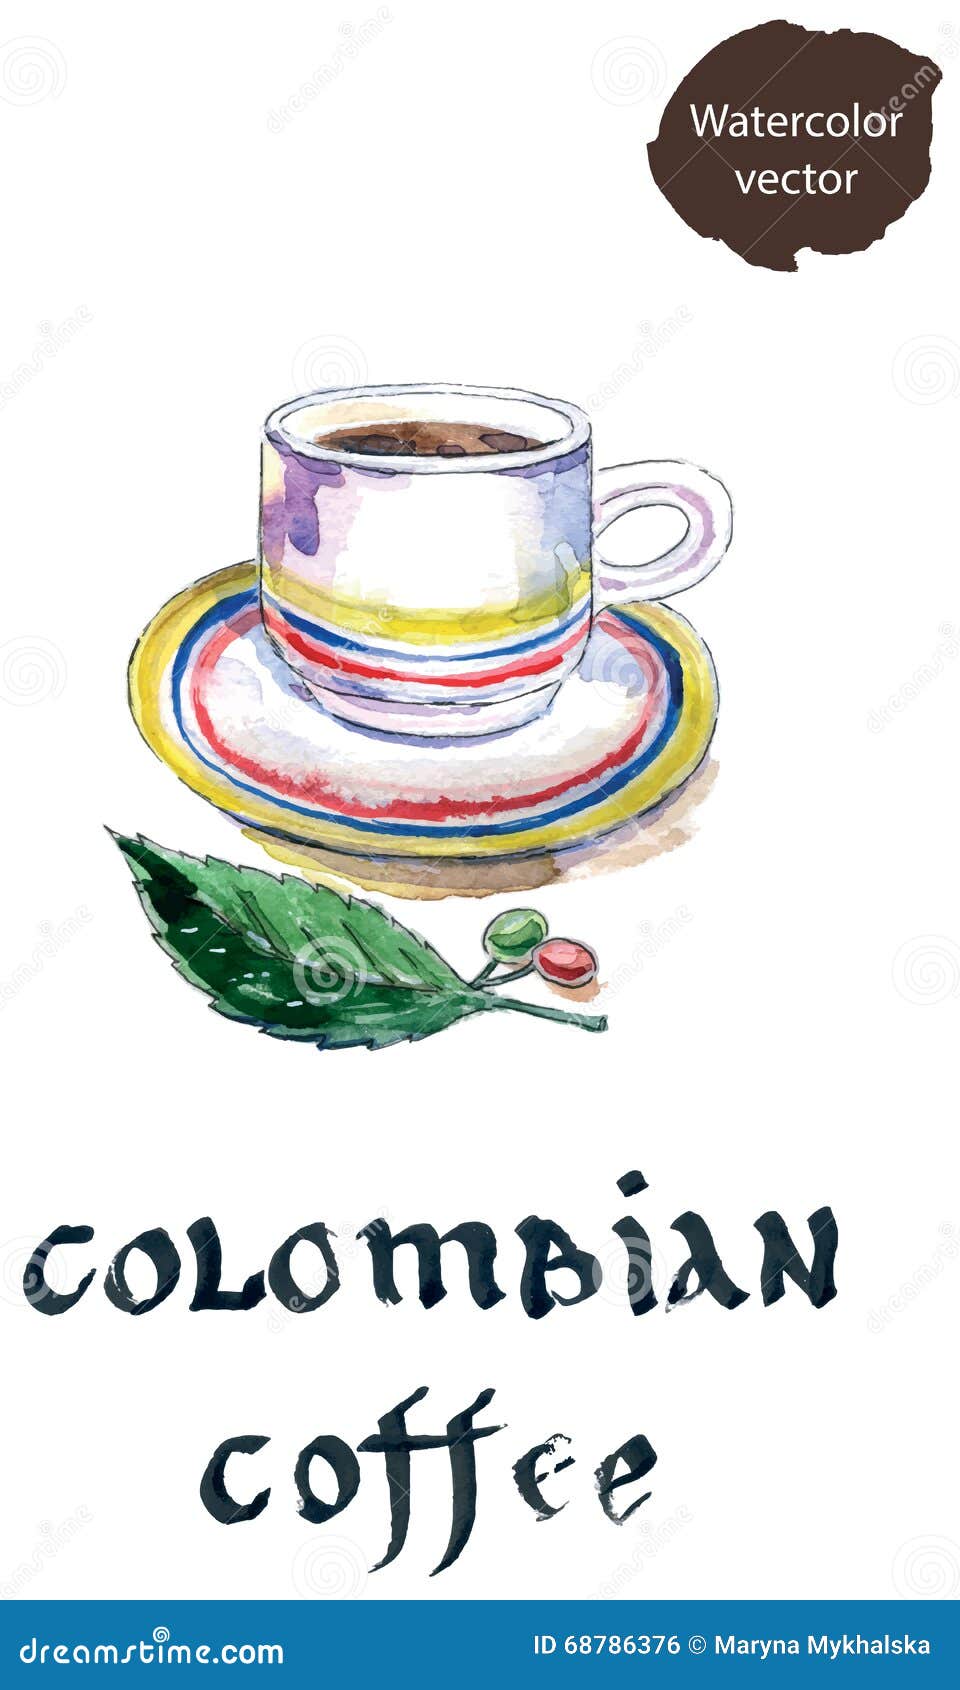 colombian coffee caffeine content